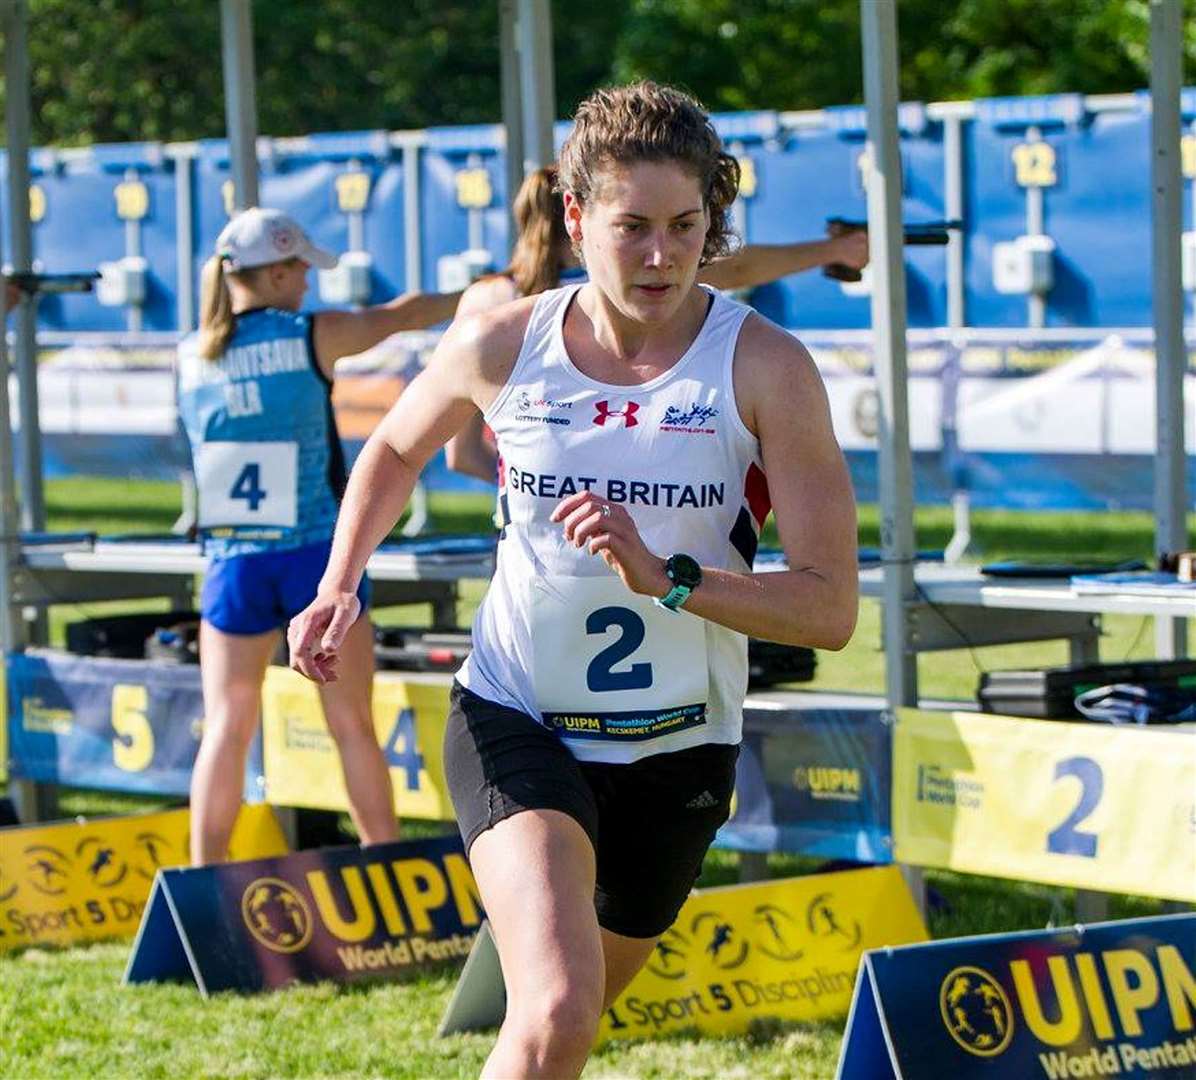 Kate French is one of two Kent athletes with previous Olympic experience and is looking to go further in Tokyo